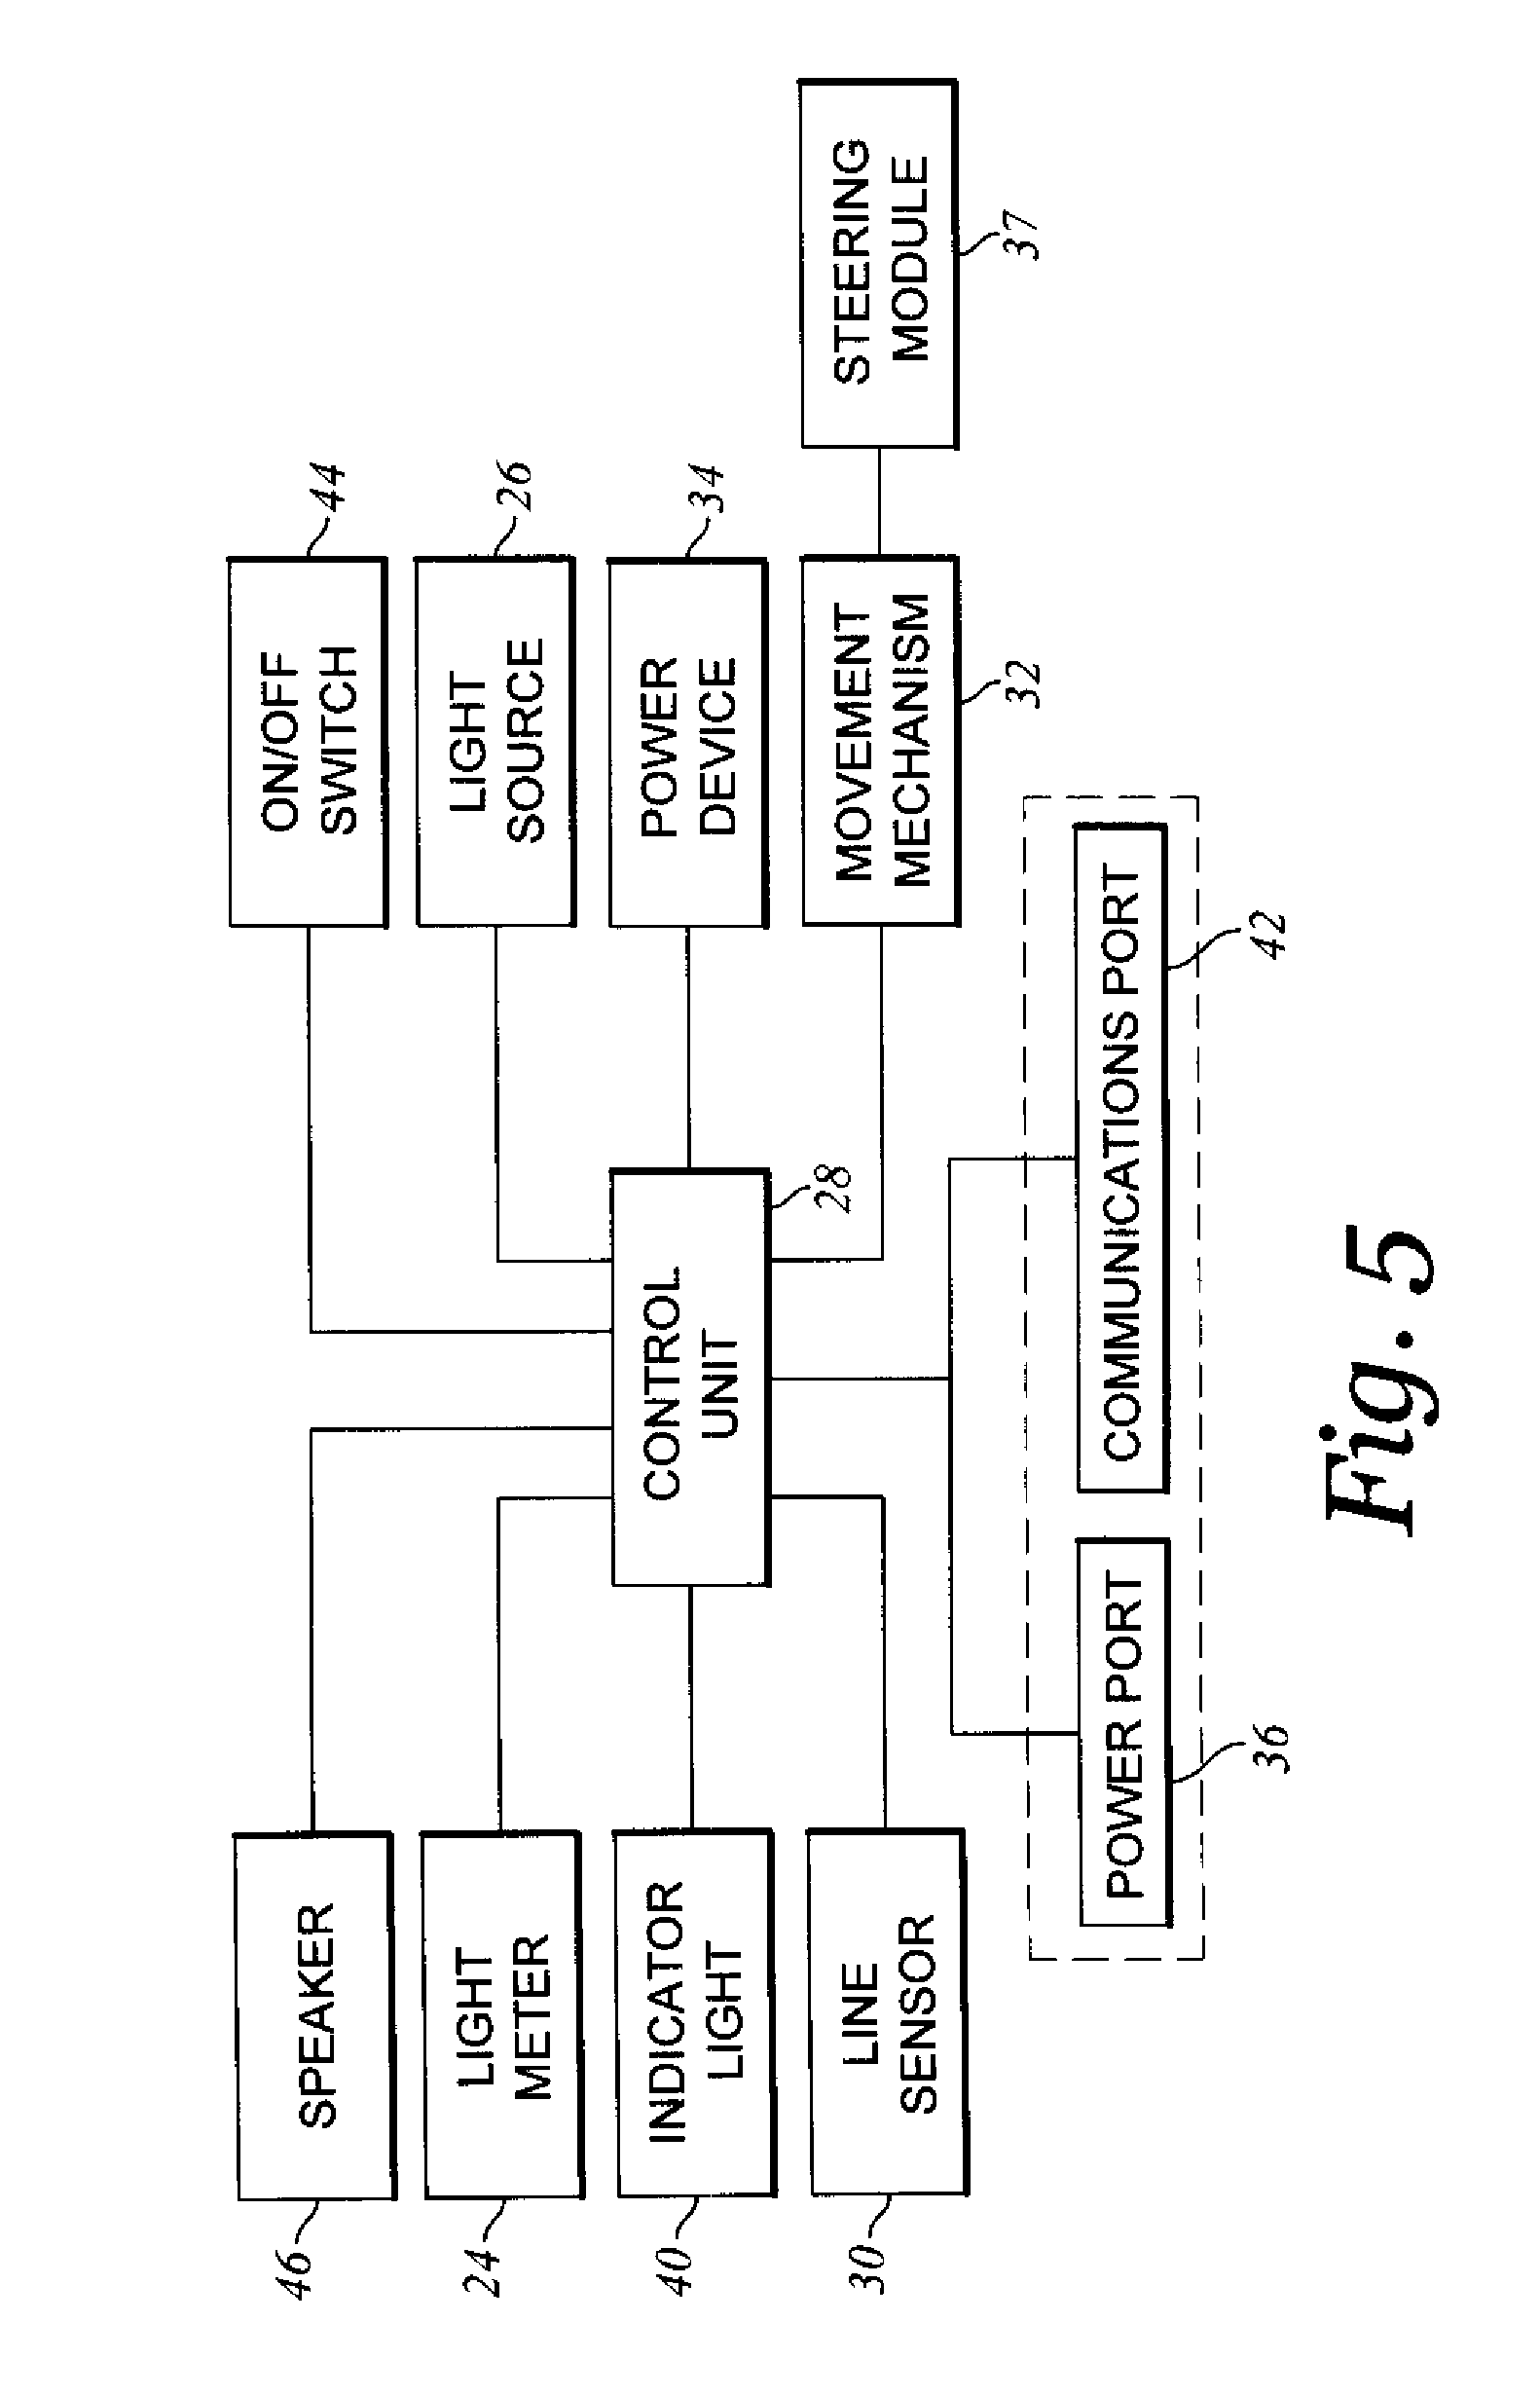 Line sensing robot and a method of using the same with a digital display